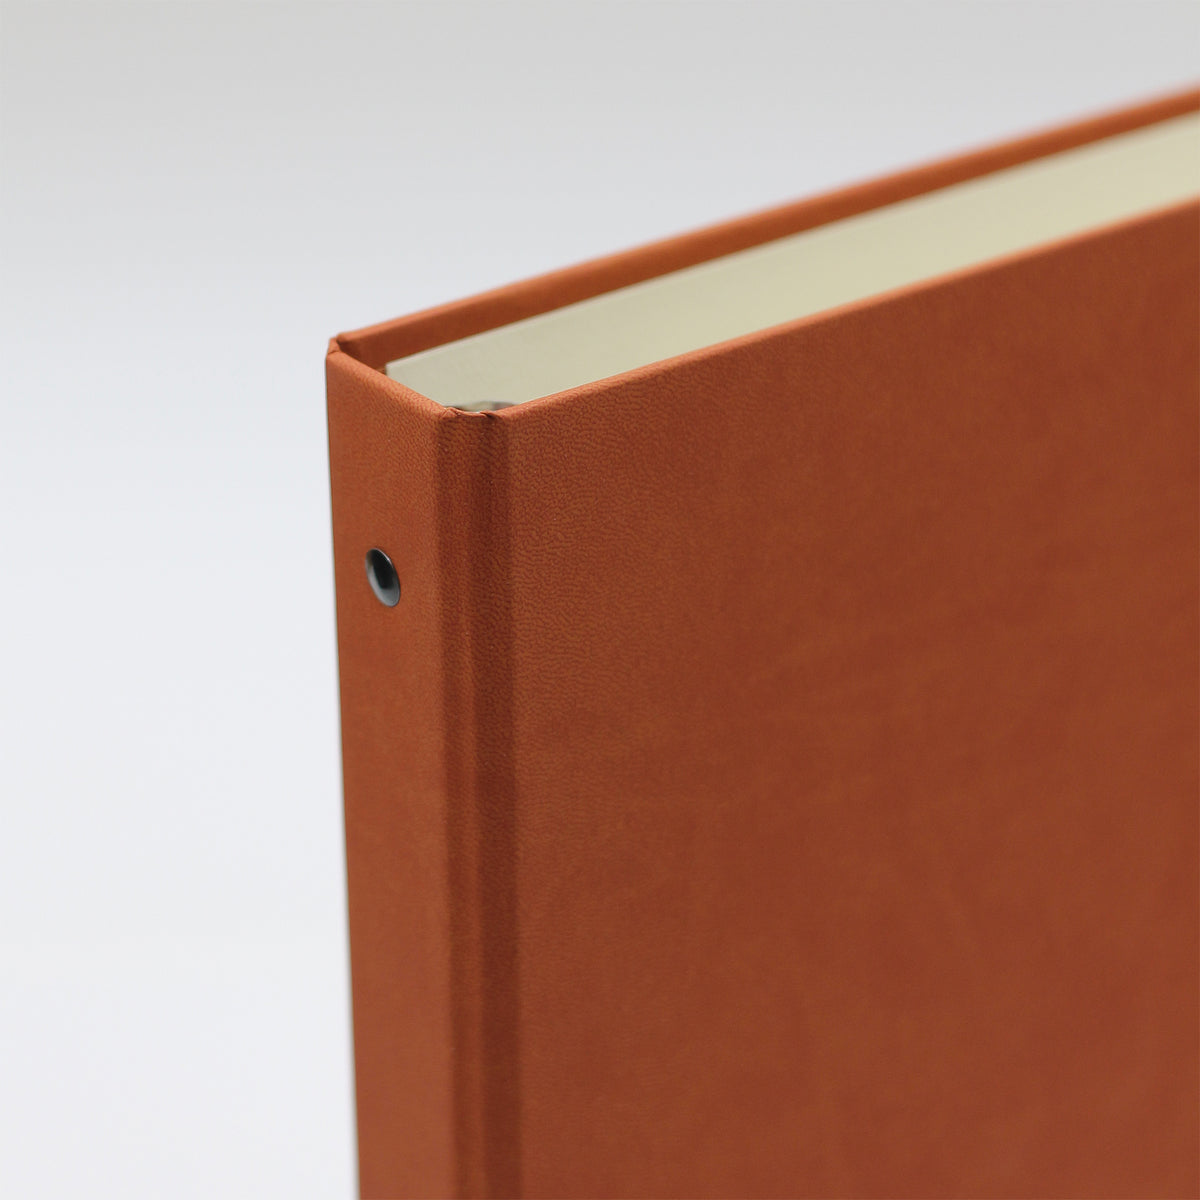 Photo Binder for 5x7 photos | Cover: Terra Cotta Vegan Leather | Available Personalized